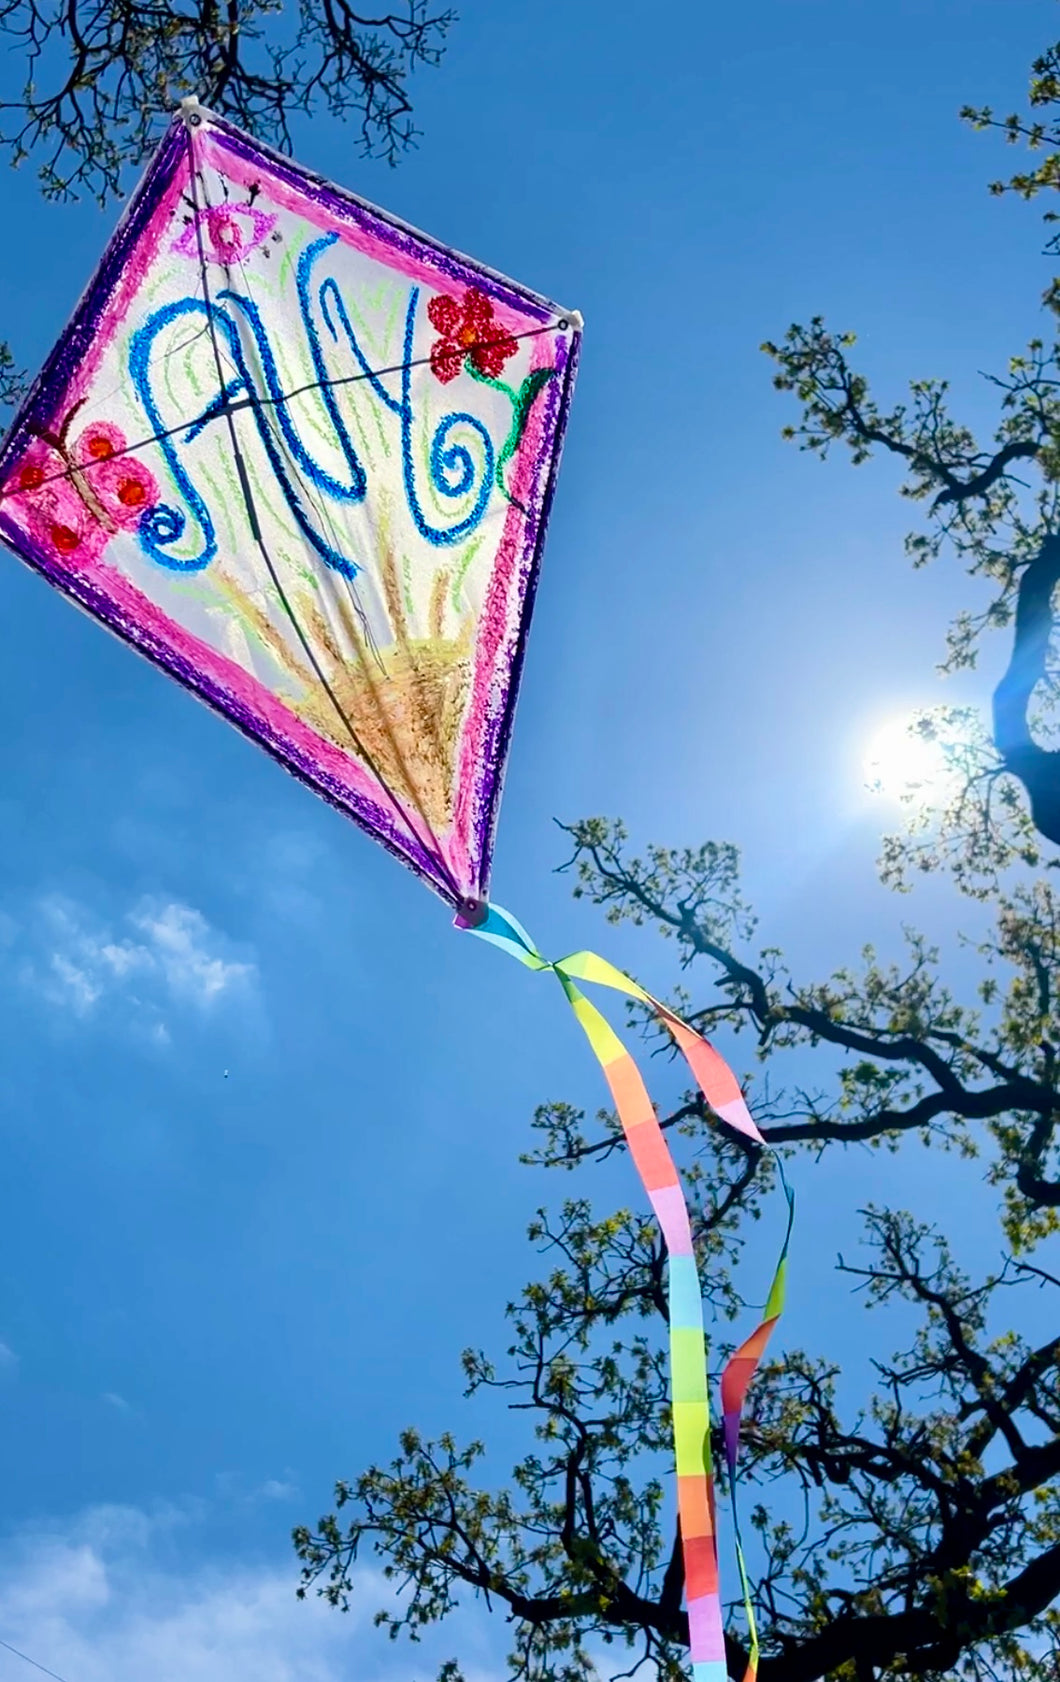 Donate $10 and Get a Kite for Your Loved One - Avy's Kite Festival Kite, Join from Anywhere